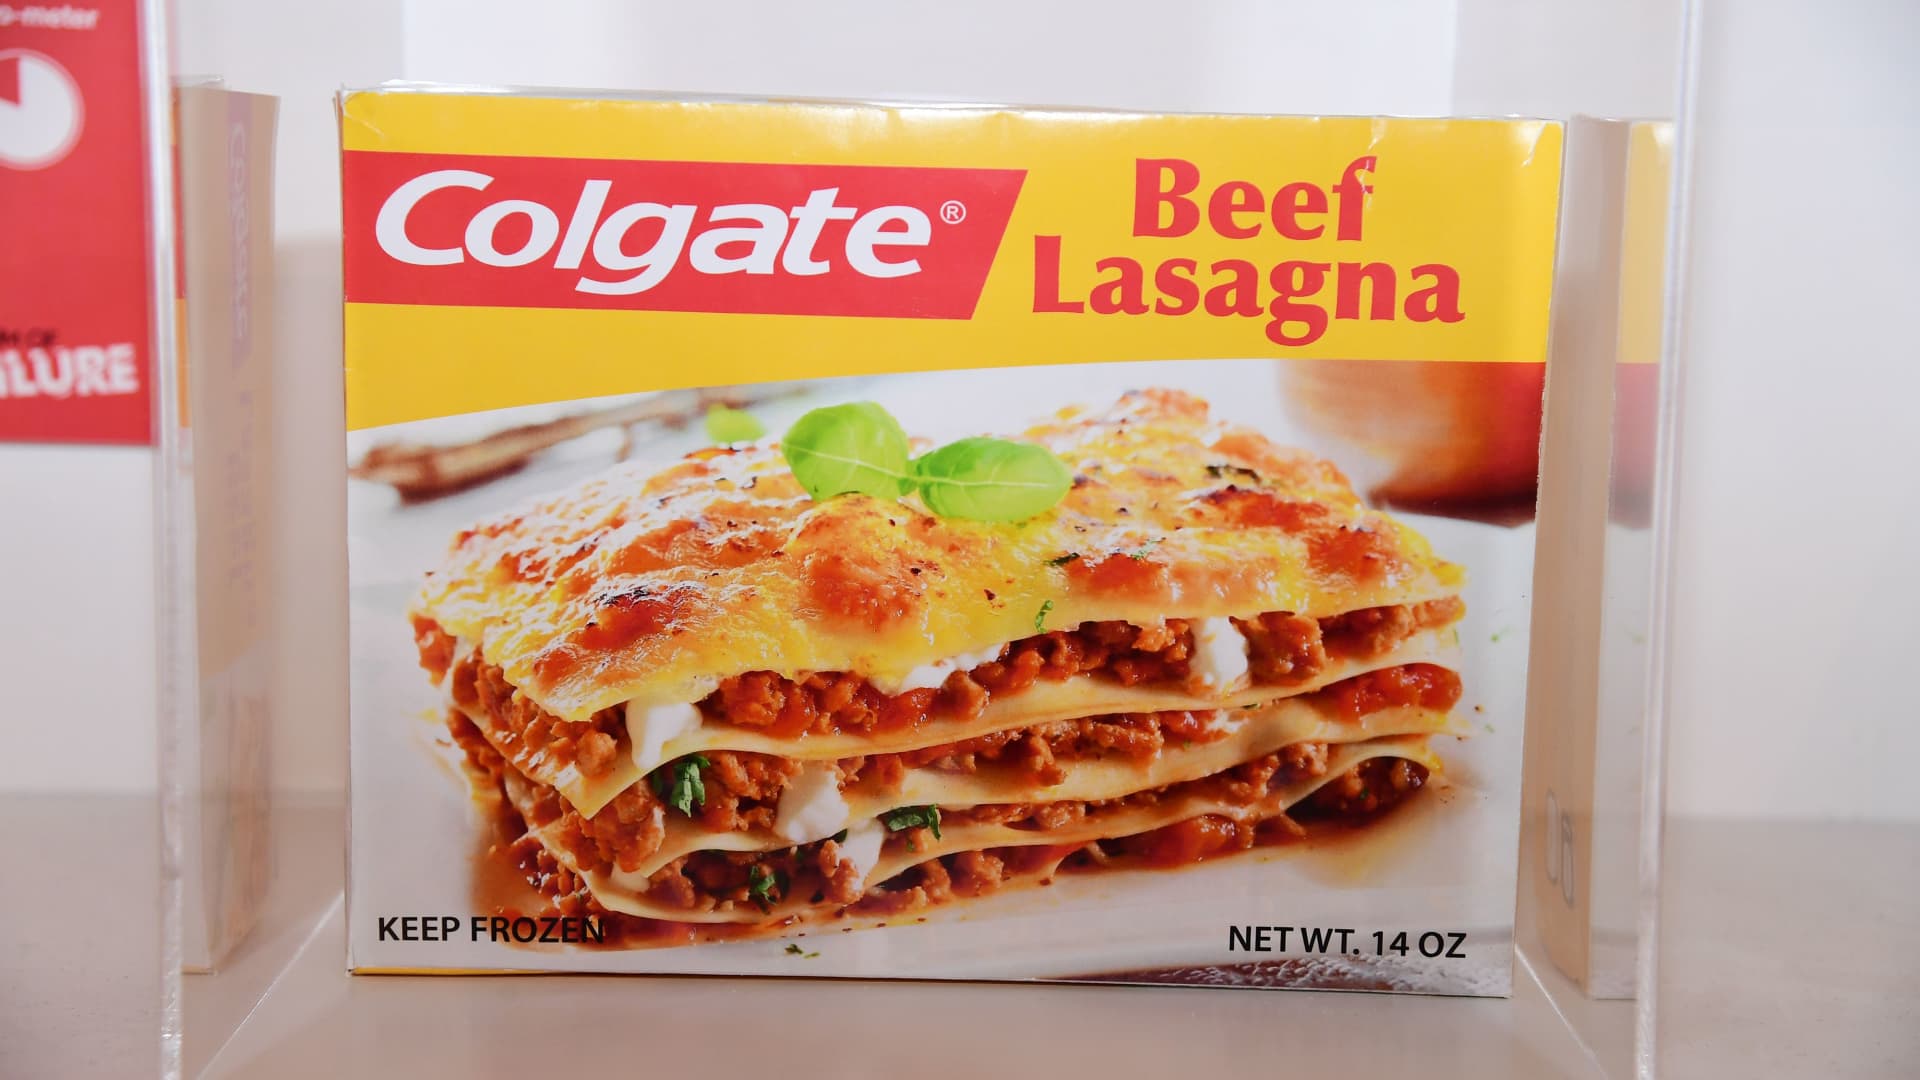 From McDonald’s $200 million Arch Deluxe to Colgate’s frozen lasagna: Here are 5 of the greatest meals ‘failures’